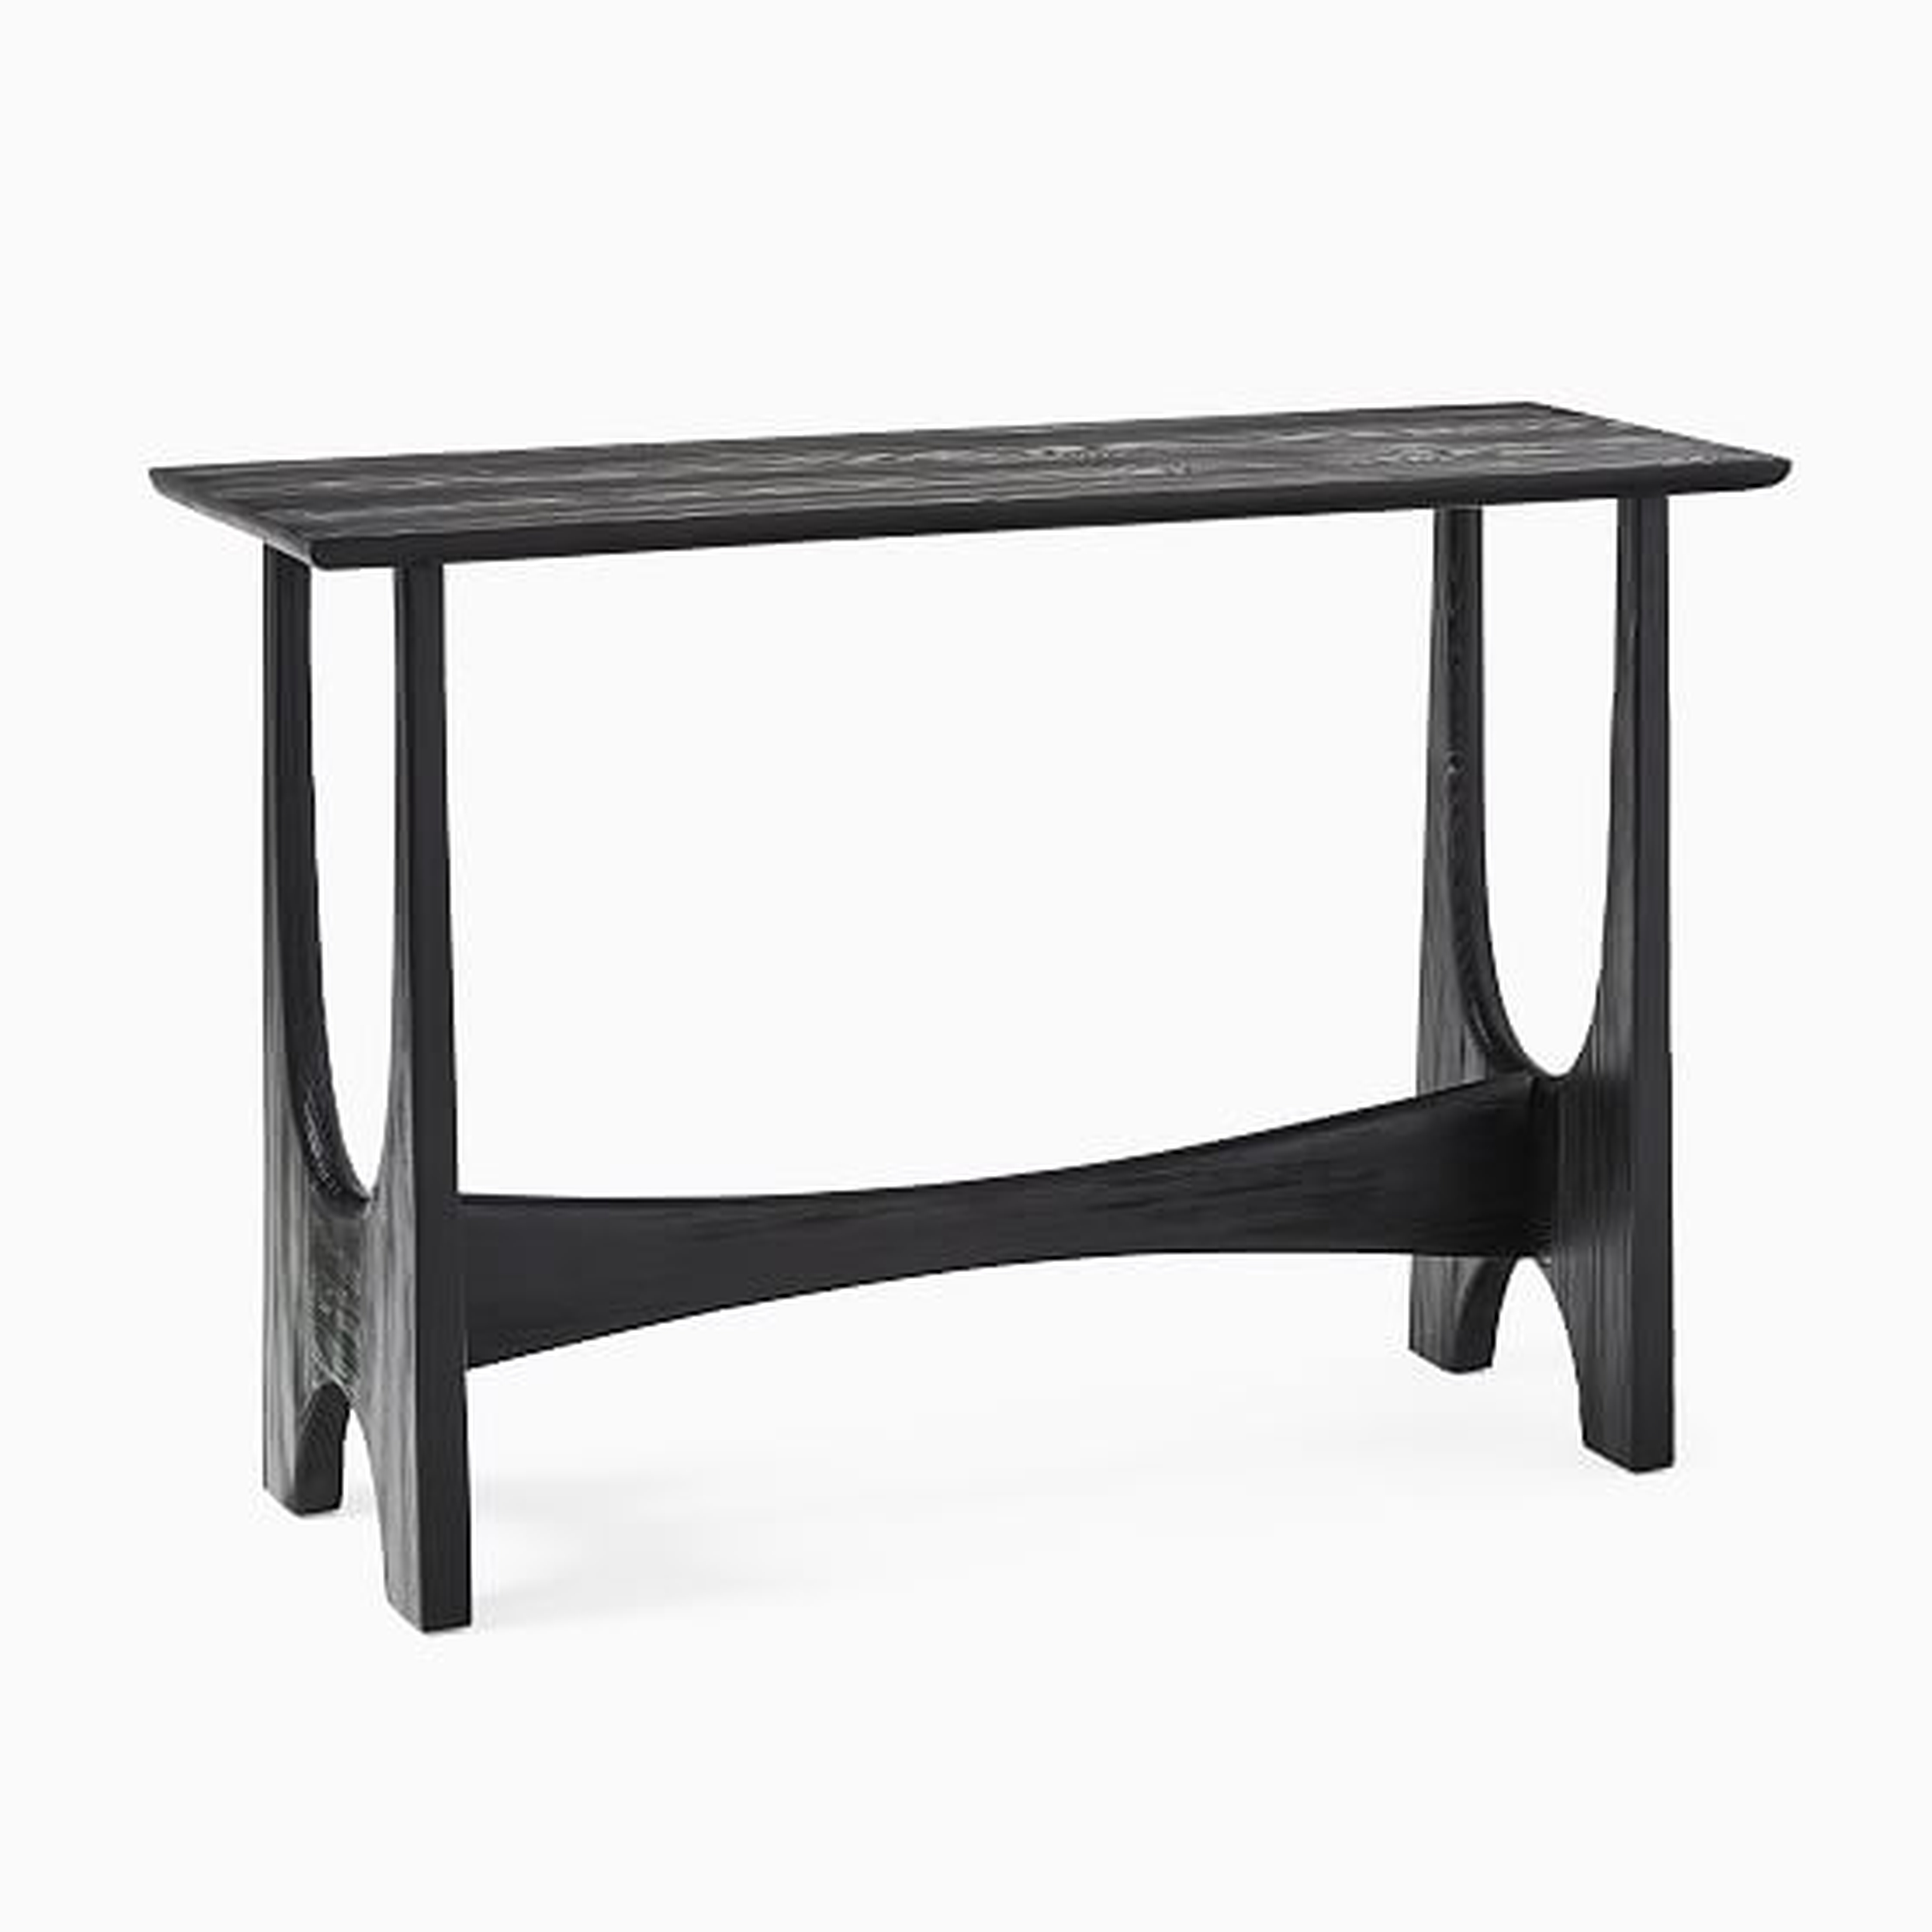 Tanner Solid Wood Collection Black Hemlock Console Table - West Elm